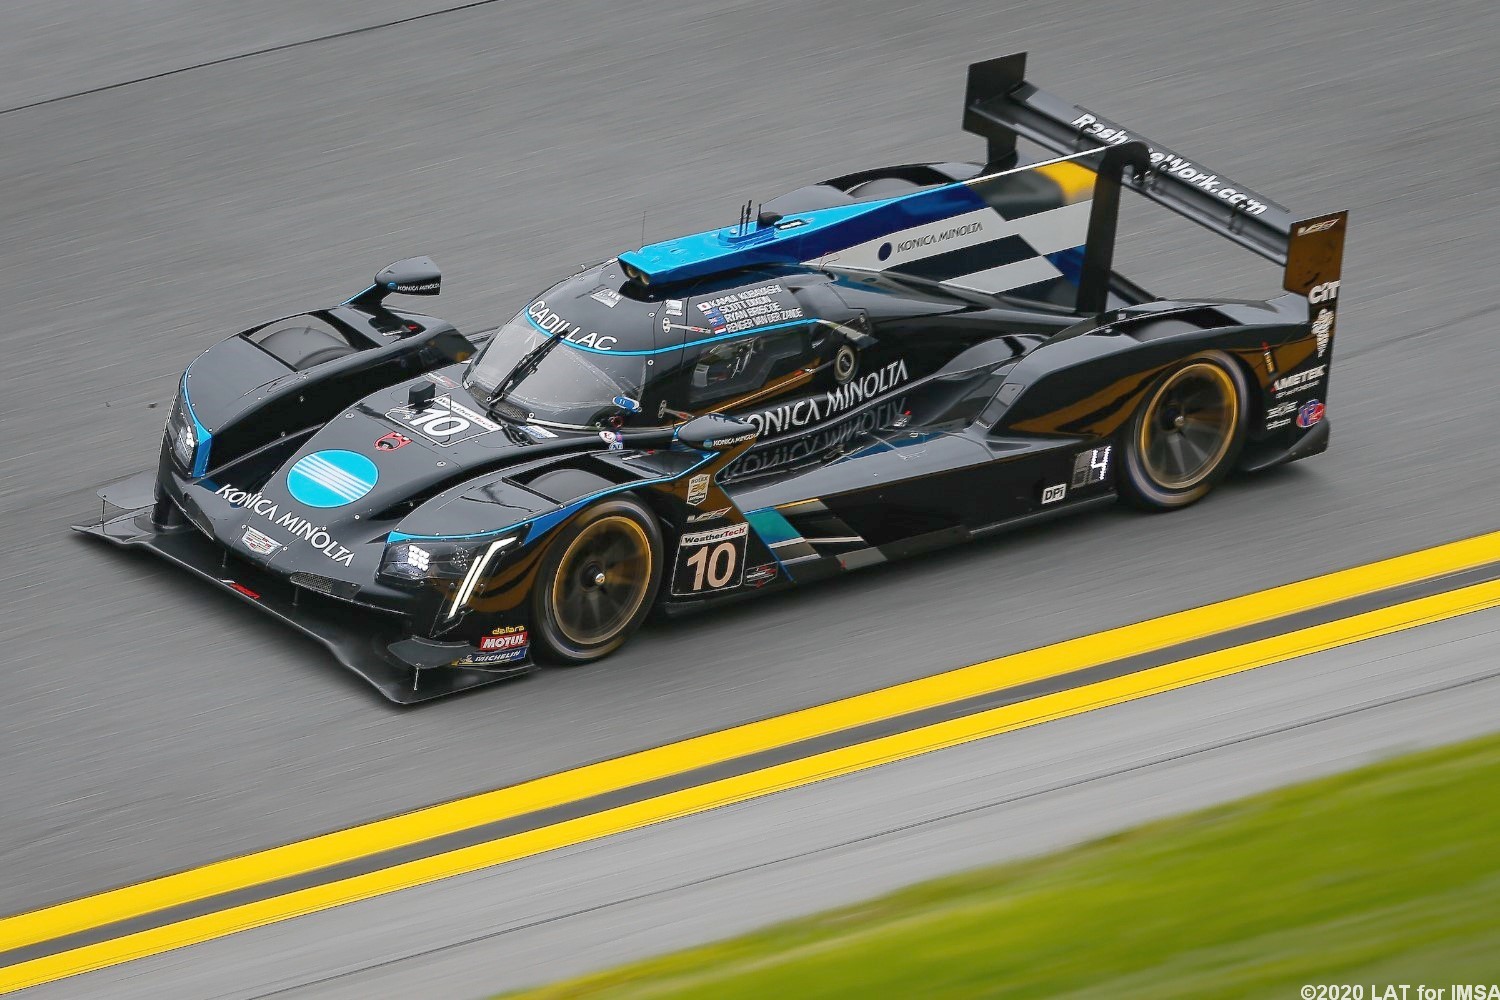 The factory IMSA Cadillac team has that little extra to win the Rolex 24 for the third time in the new IMSA DPi era